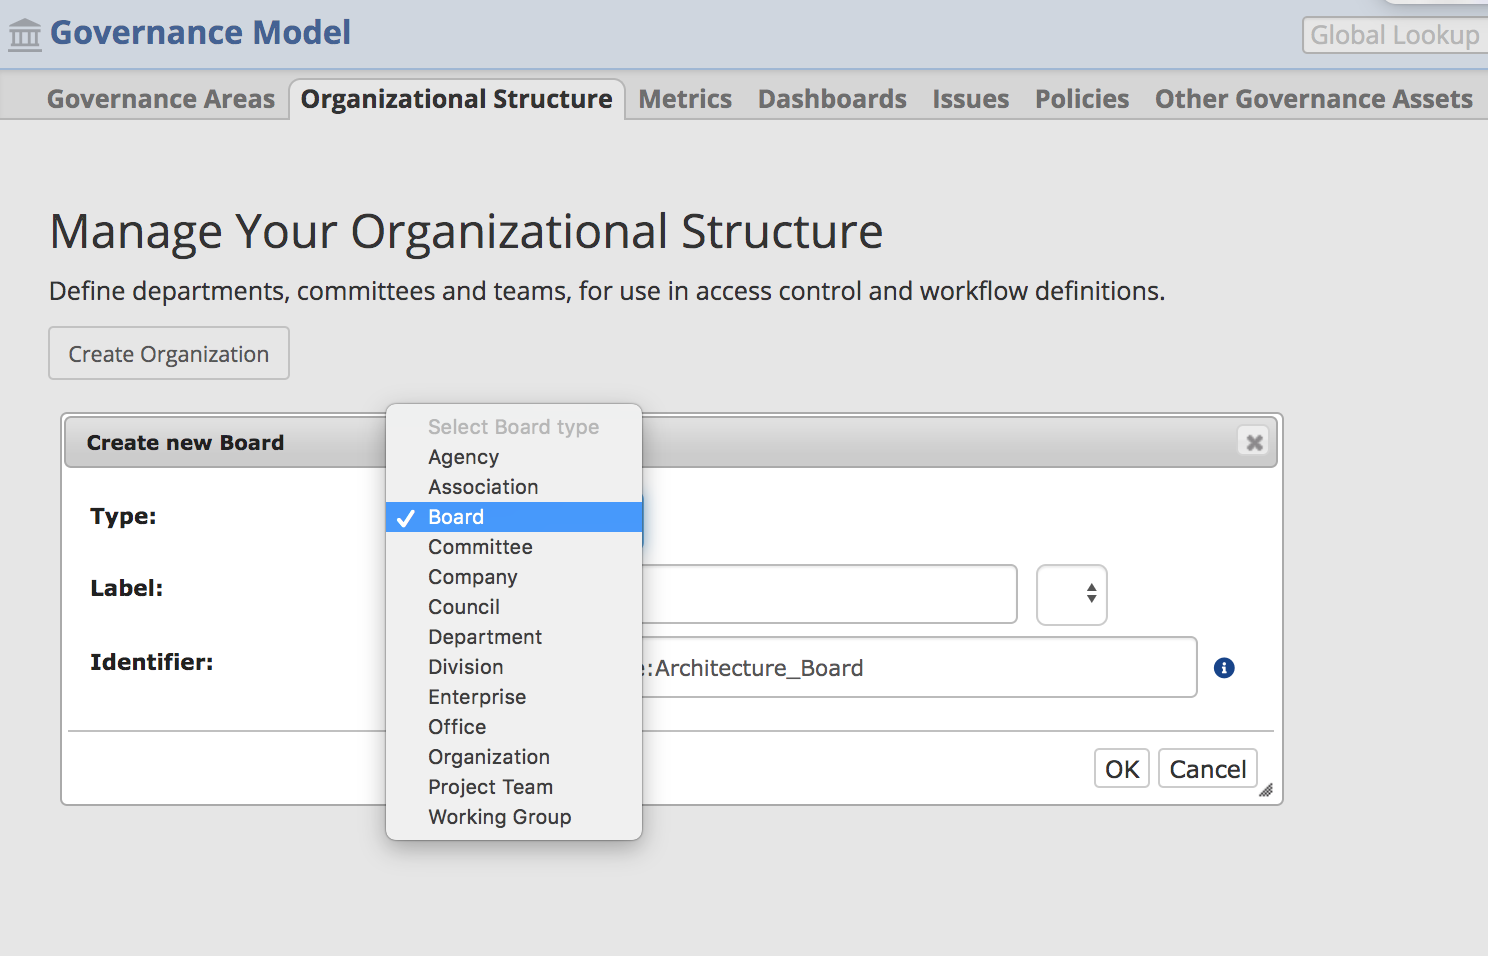 TopBraid EDG Manage Your Organizational Structure View